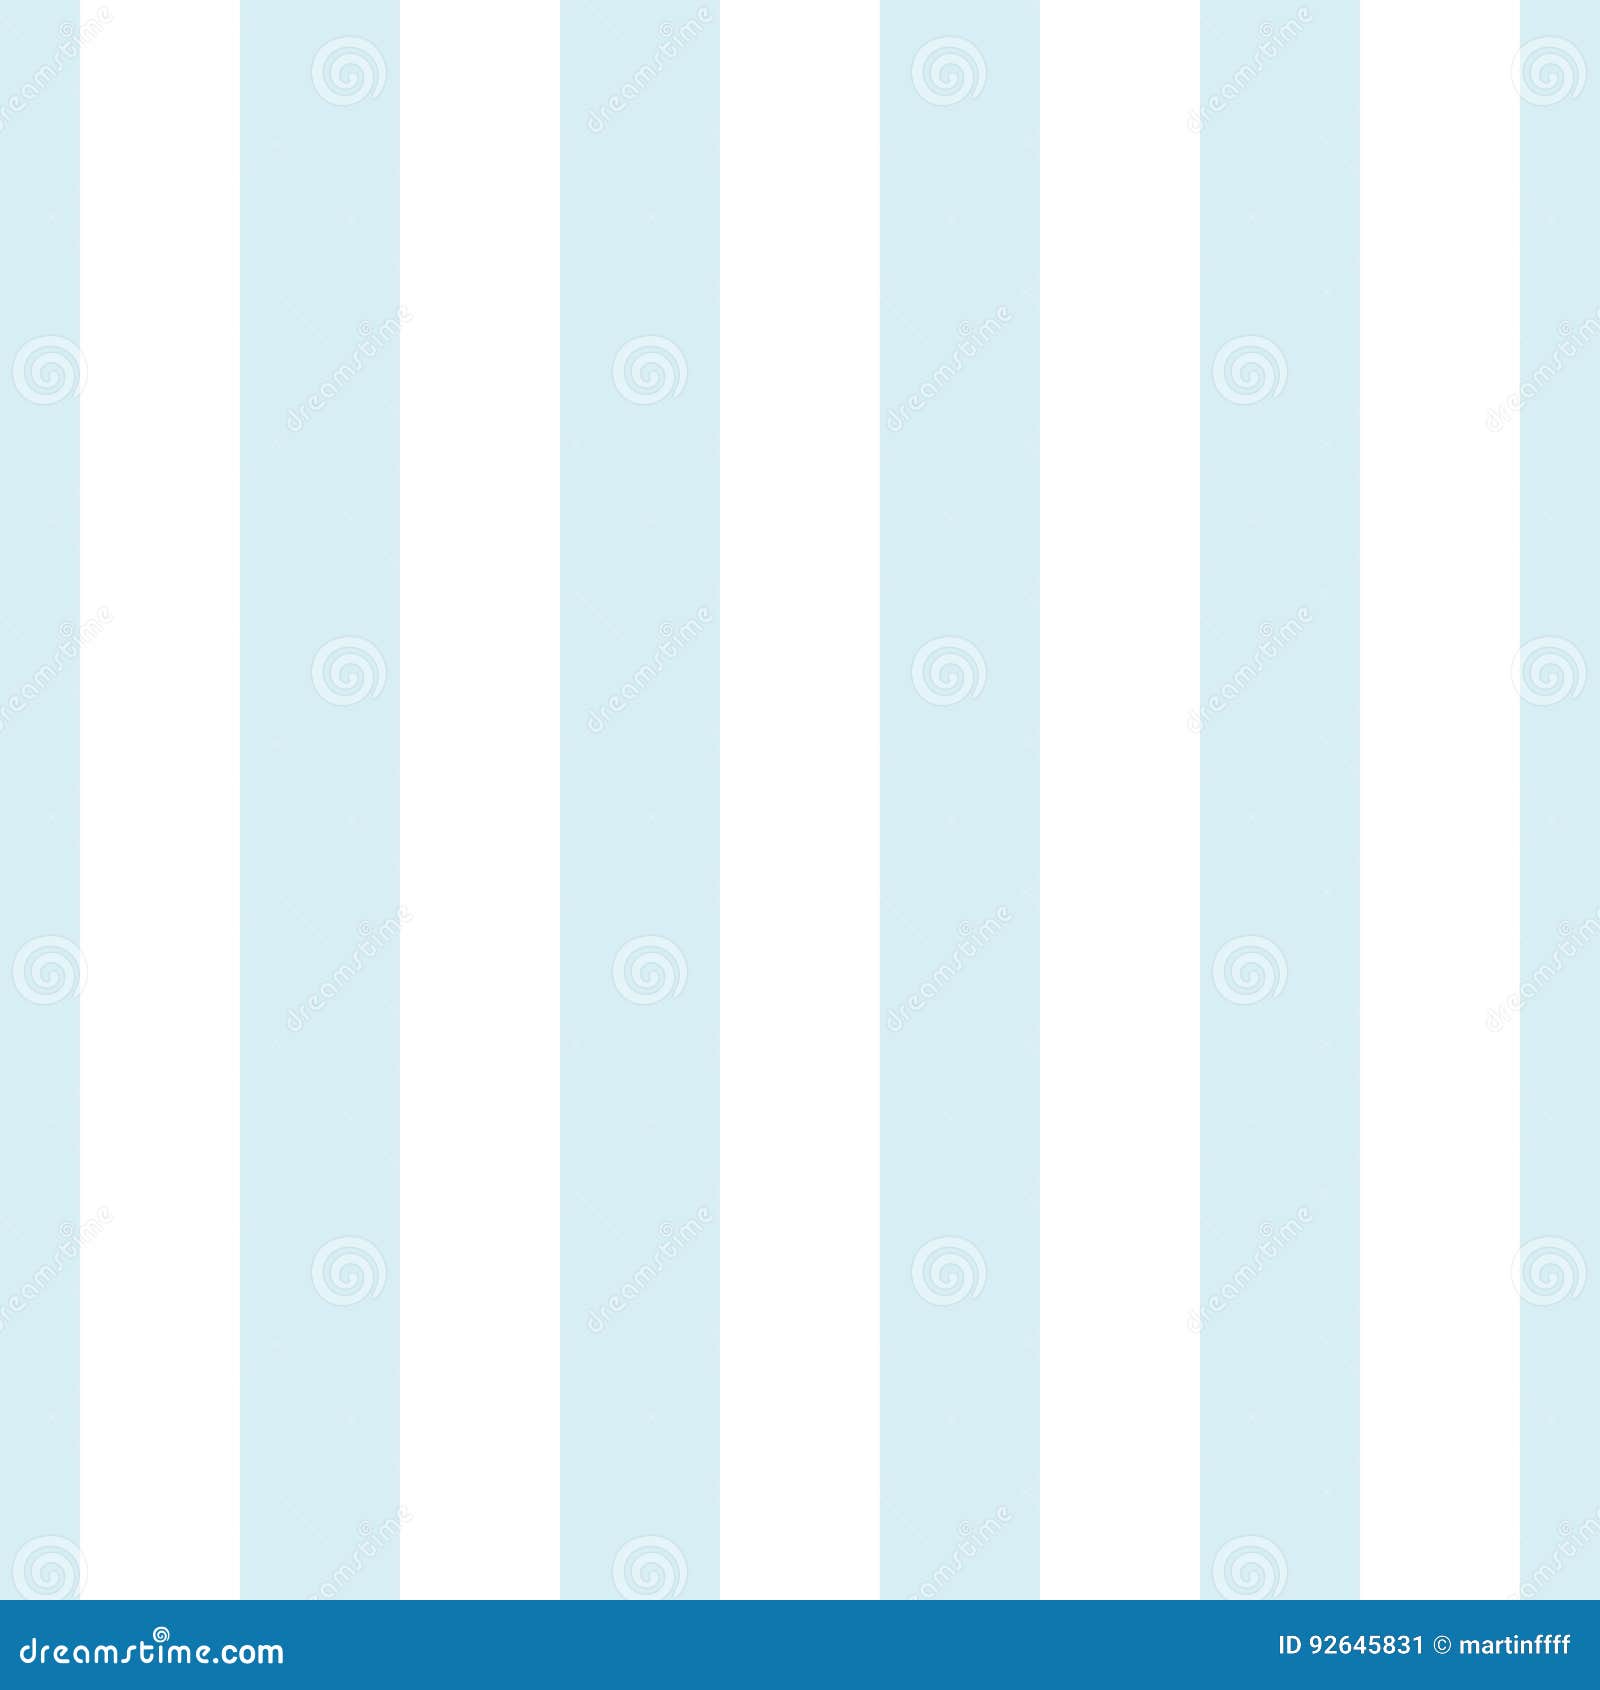 light blue and white vertical stripes seamless pattern